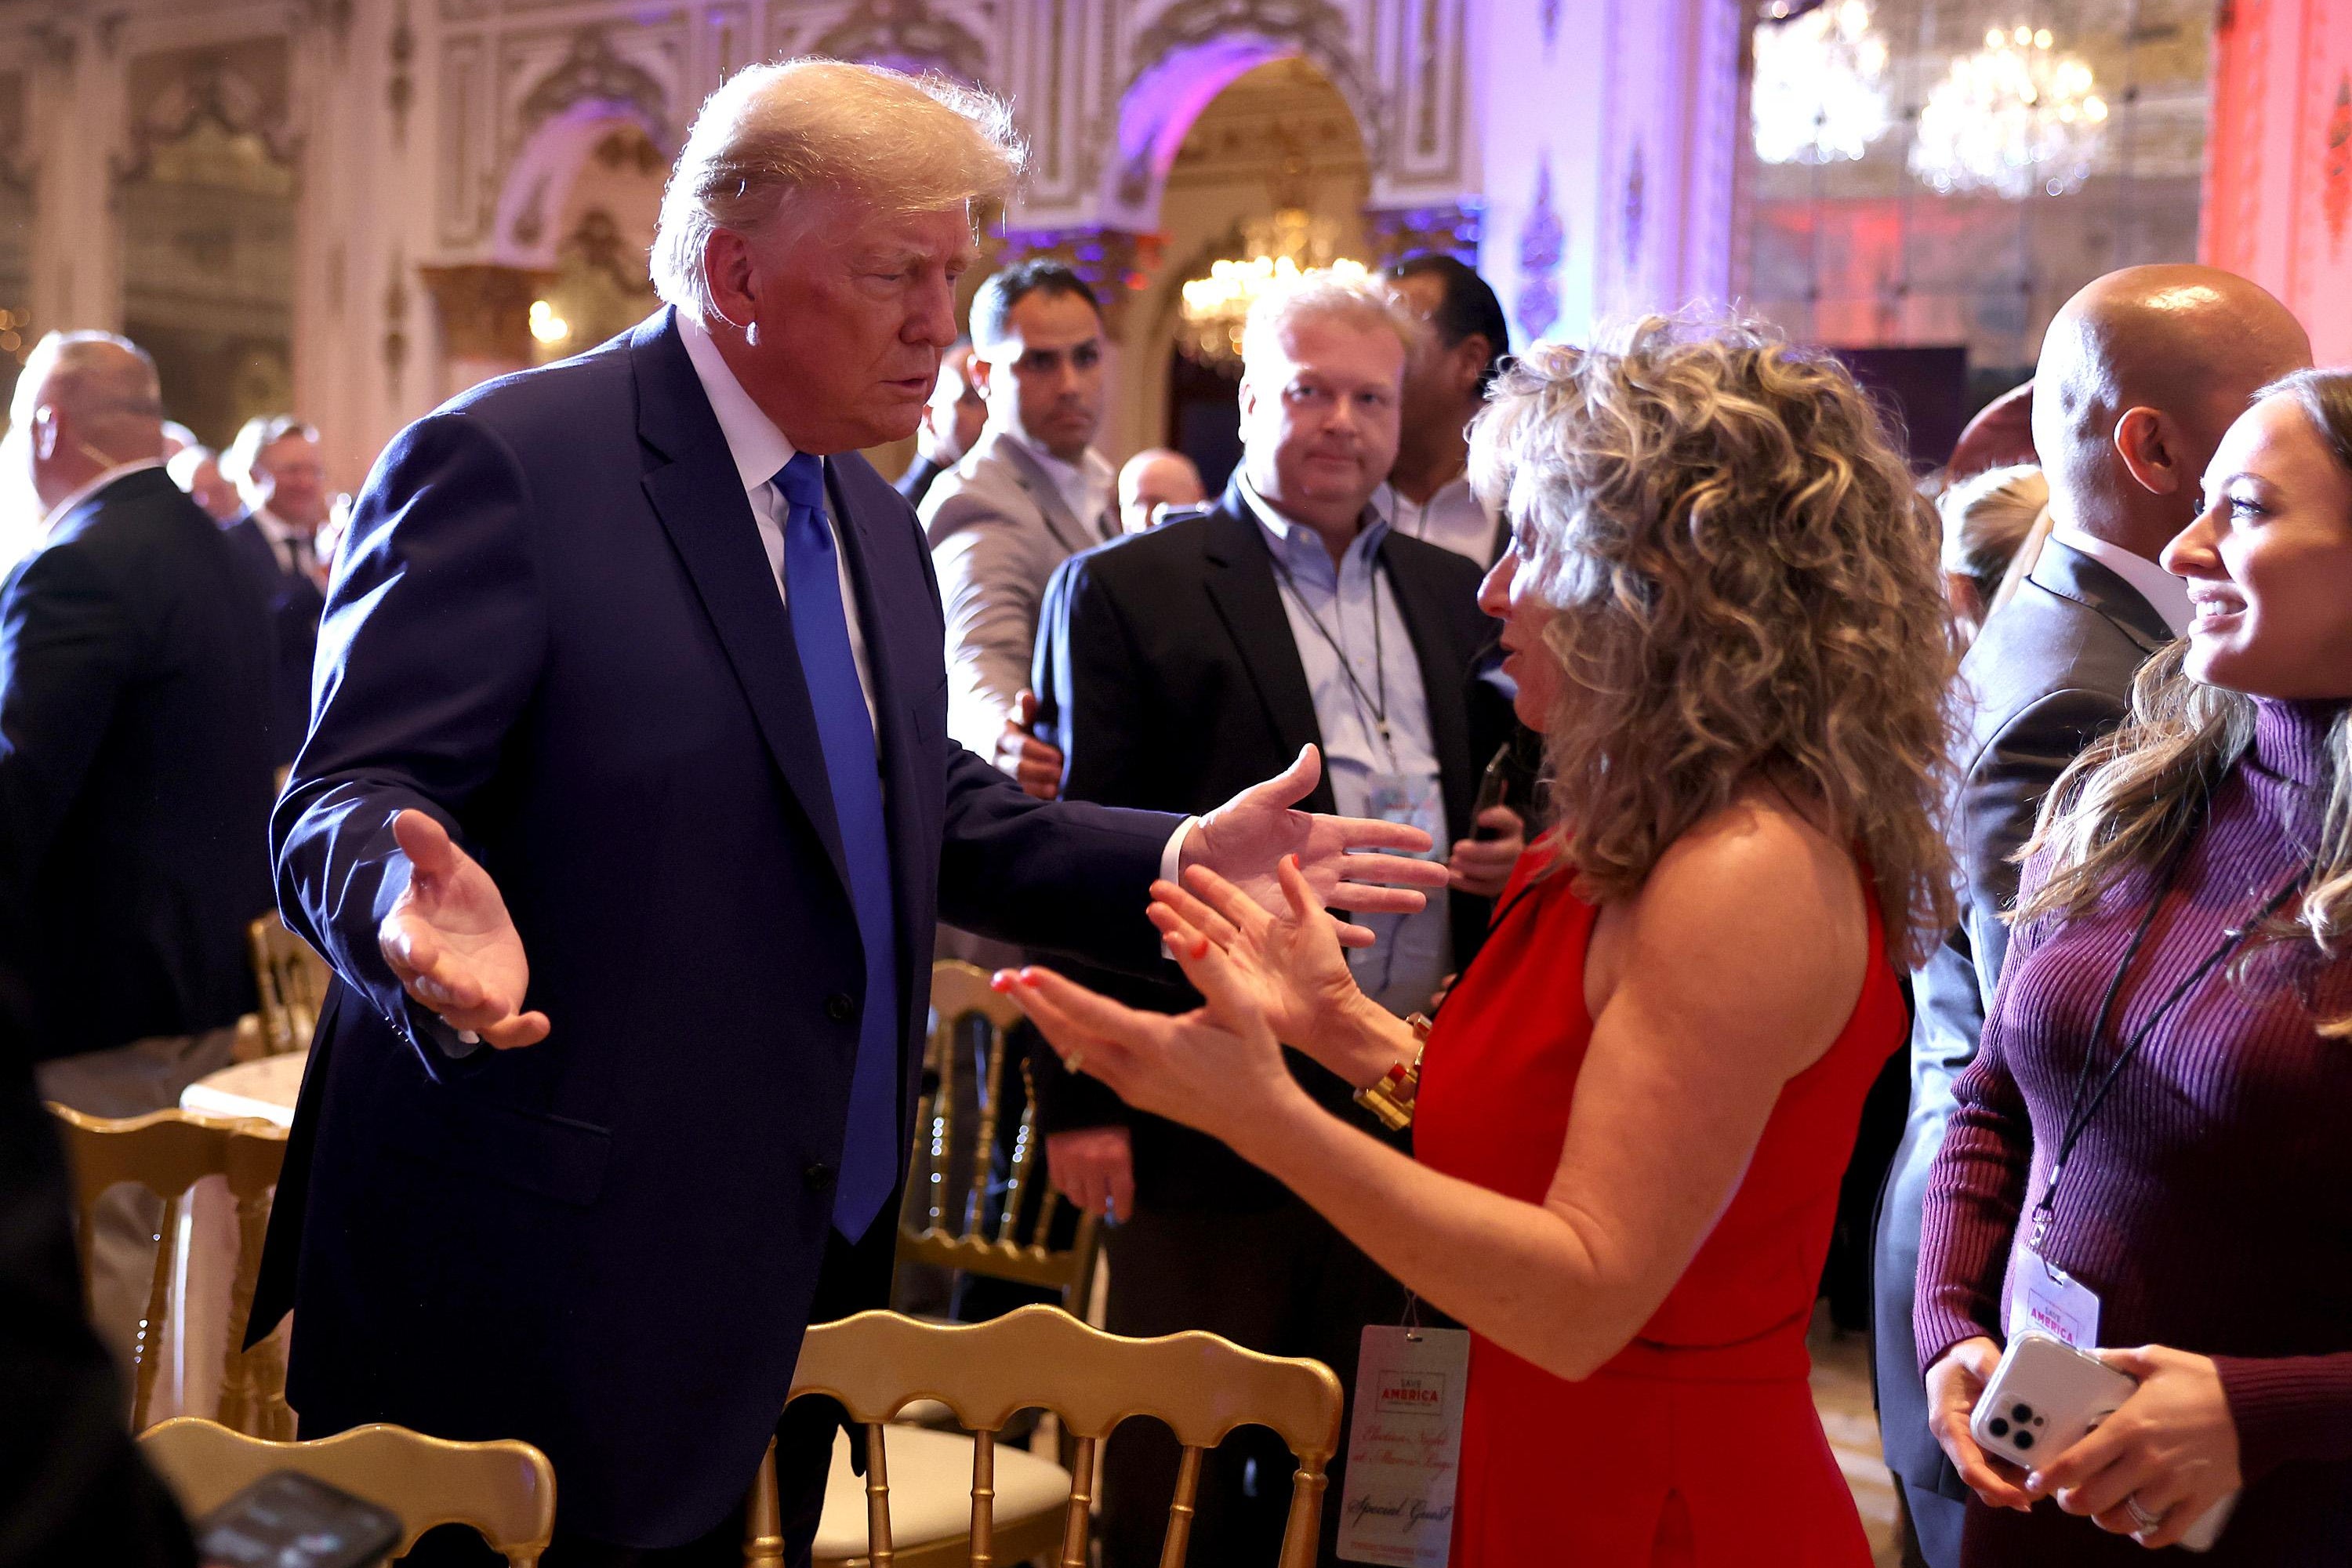 Former U.S. President Donald Trump mingles with supporters during an election night event at Mar-a-Lago. He's shrugging his shoulders at the woman he's talking to.
